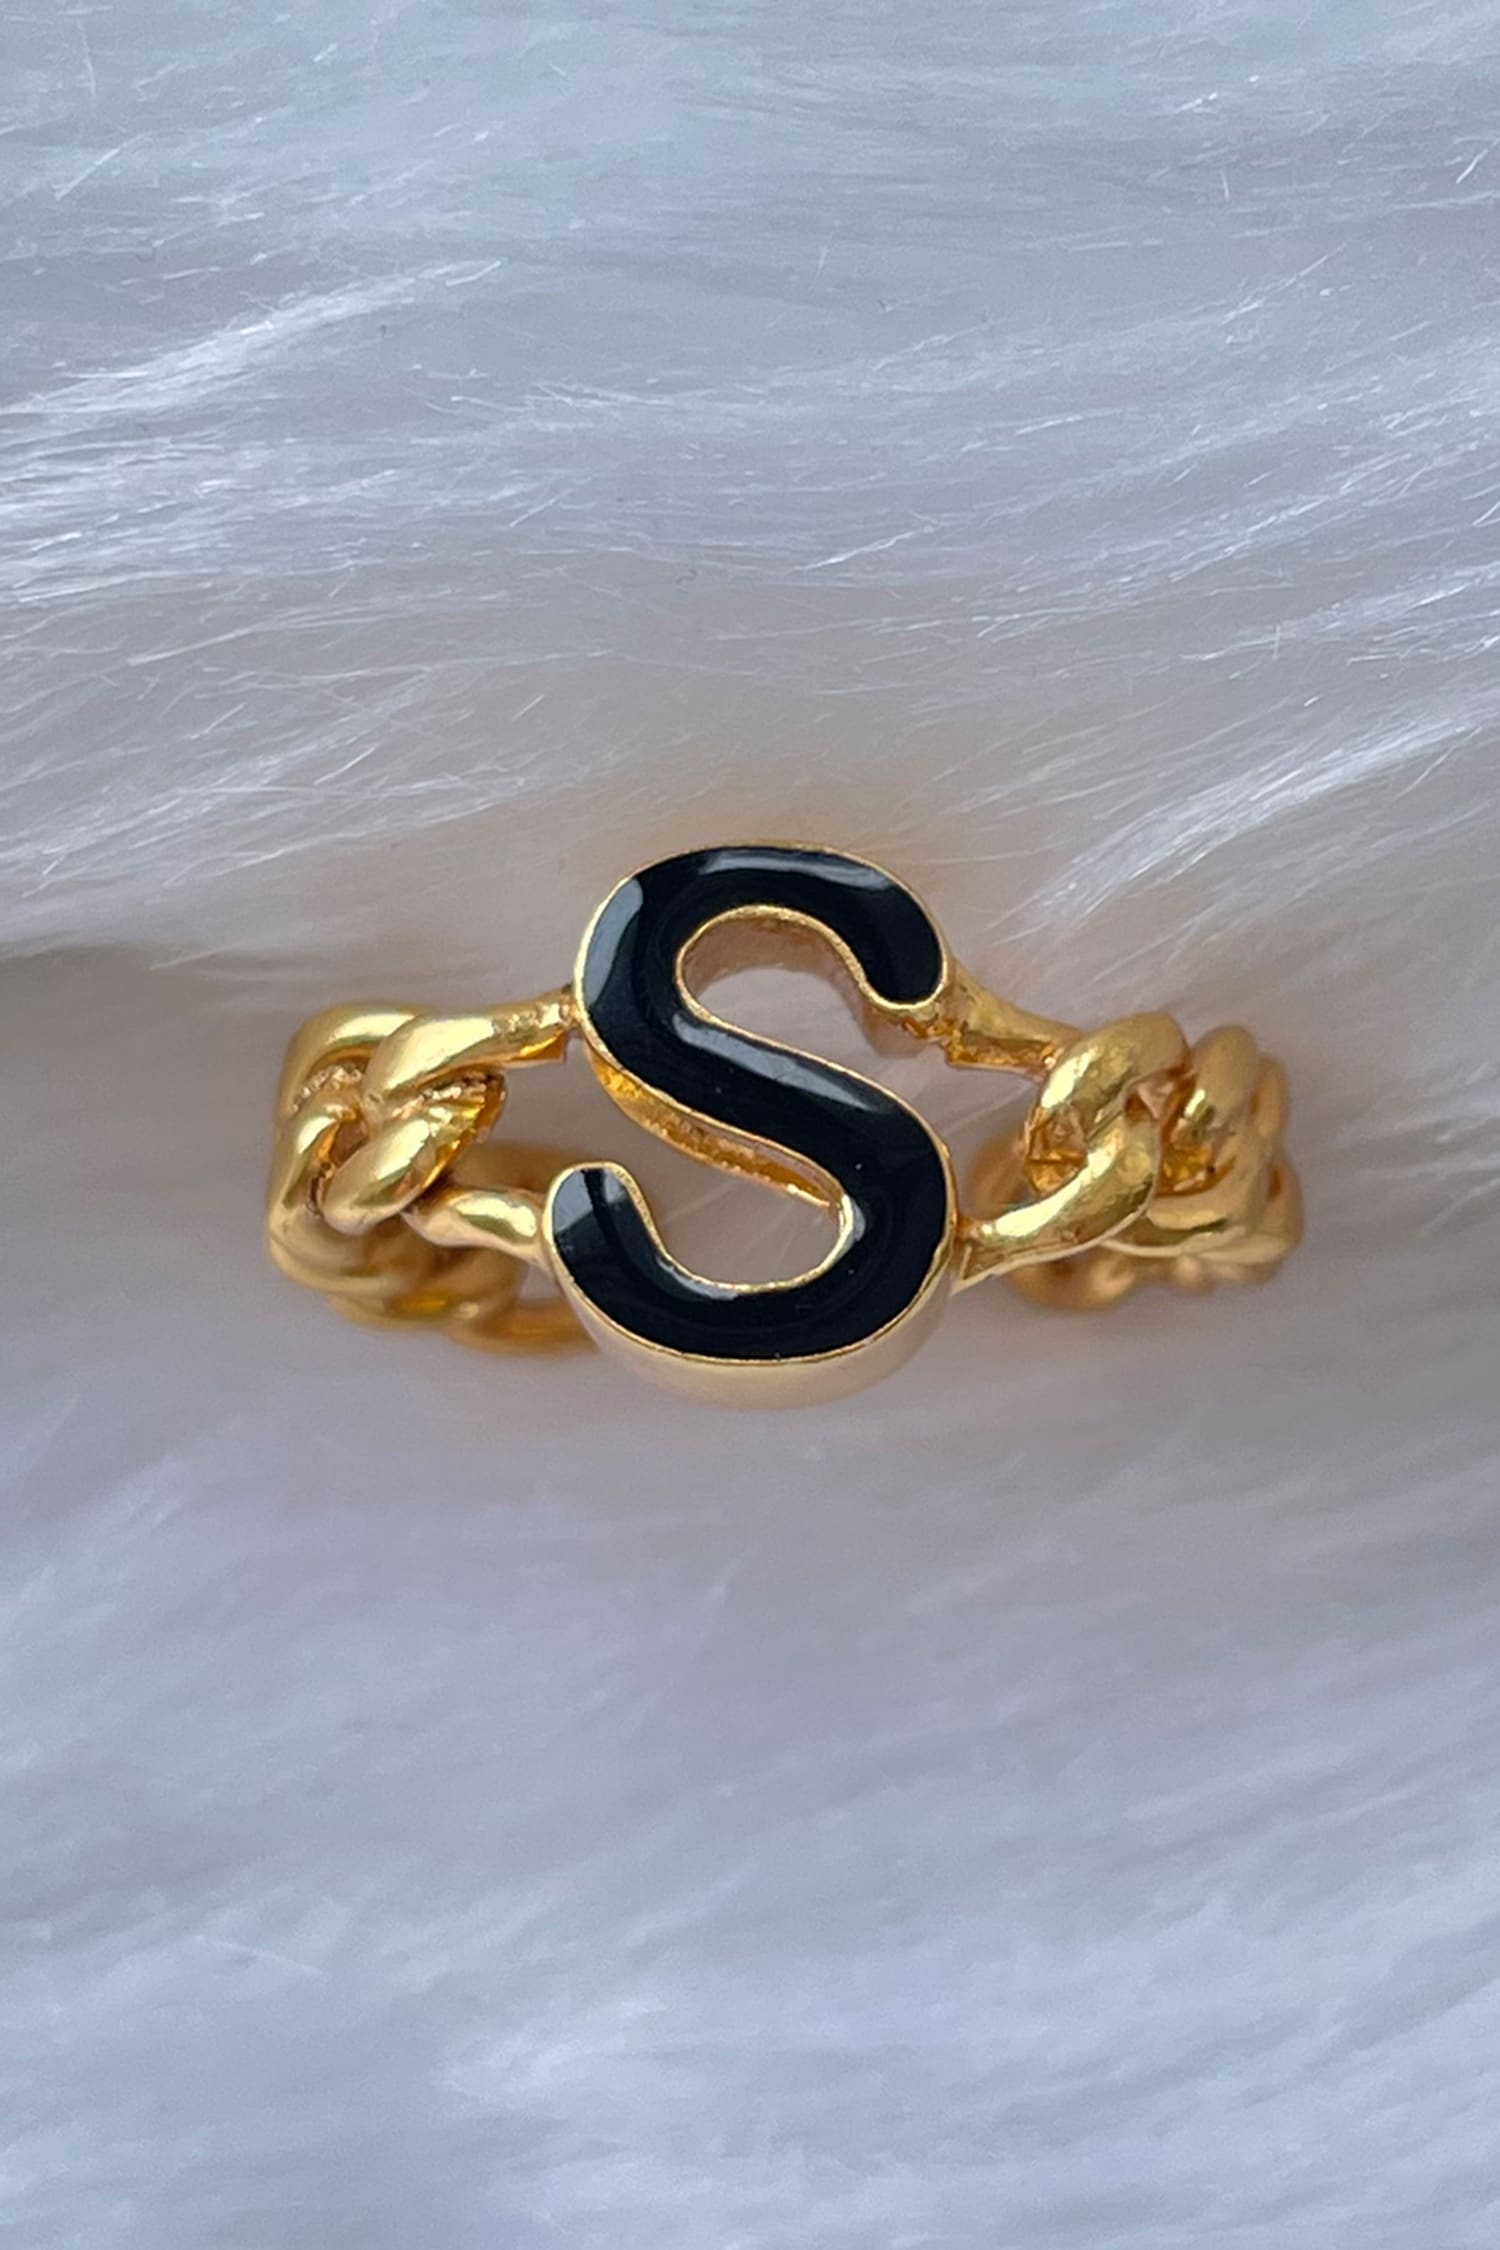 925-Sterling-Silver Snake Ring for Women - Cute Open Adjustable Ring Plated  with Shiny White Gold/18K Gold,Whether You Snakes Lovers or  Not,Personalized Fashion Jewelry is Worth Having | Amazon.com